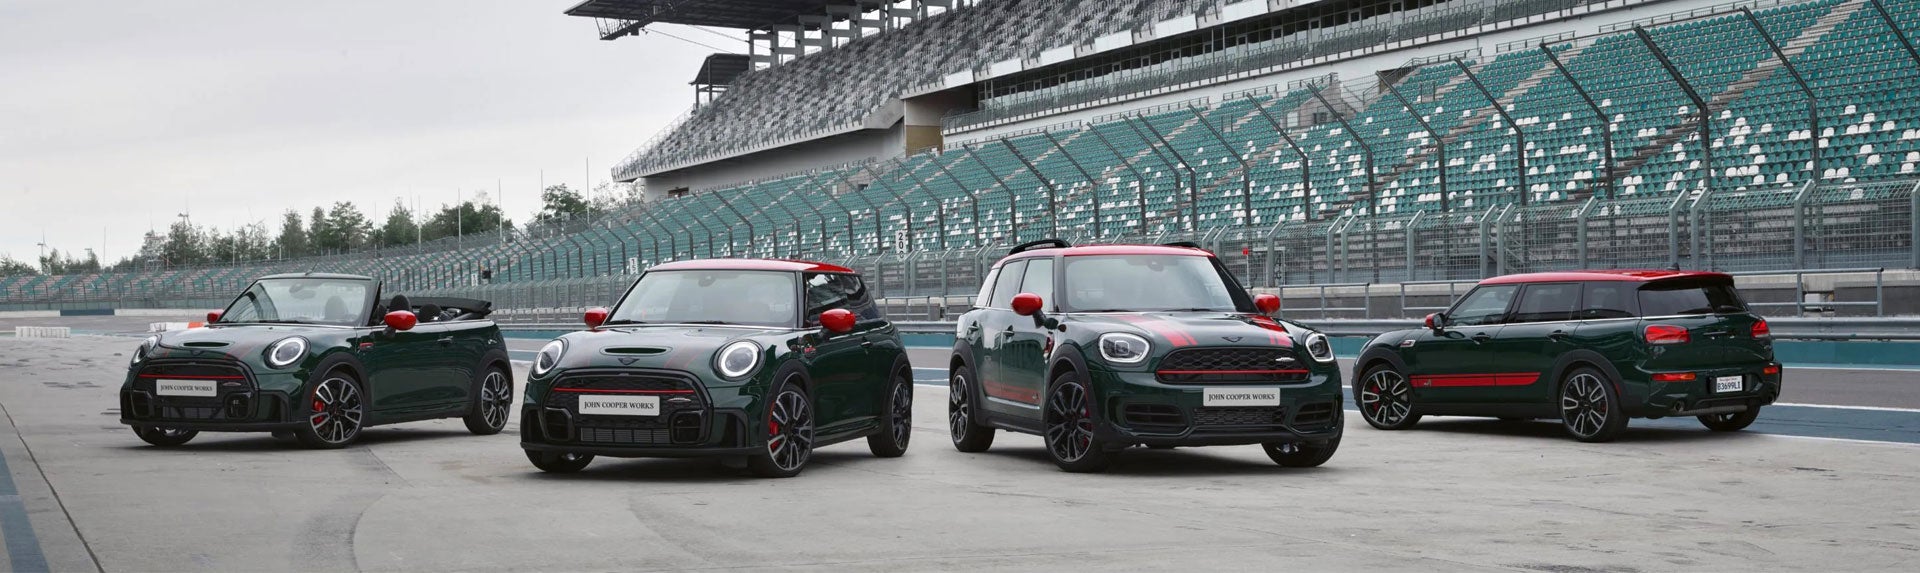 Family of four MINI John Cooper Works models parked on a race track. | MINI of Montgomery County in Gaithersburg MD